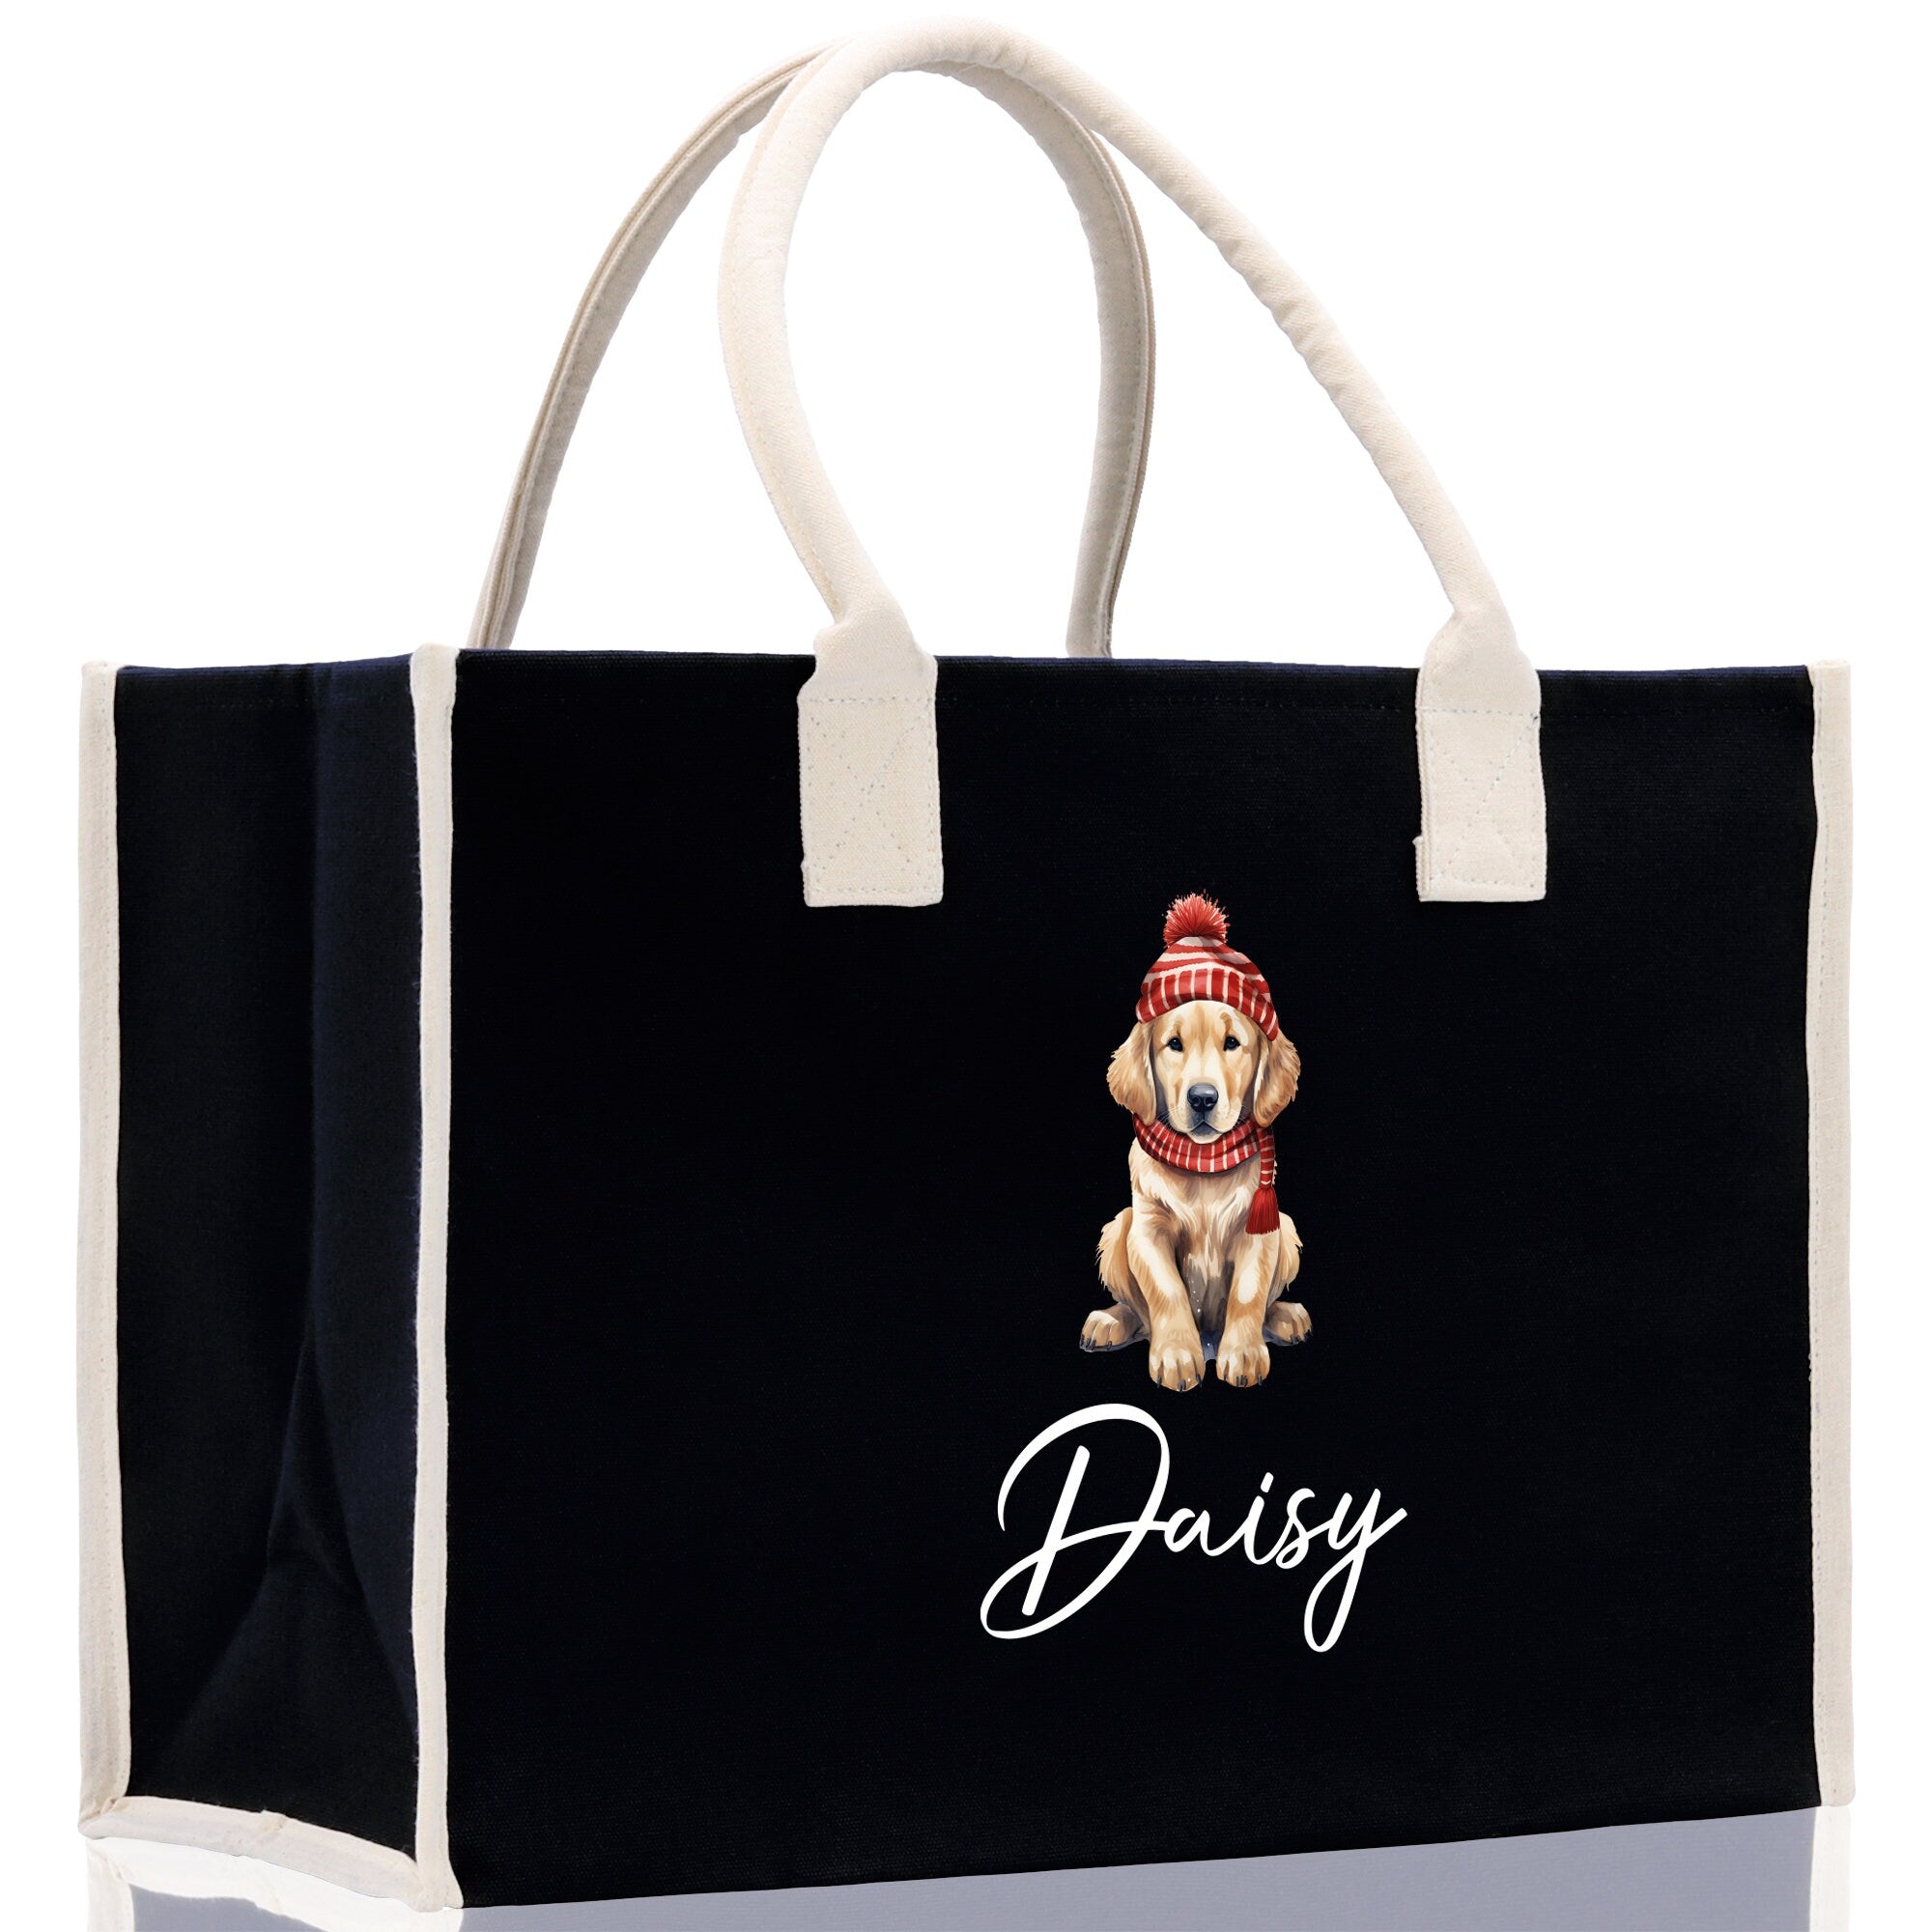 a black shopping bag with a dog on it